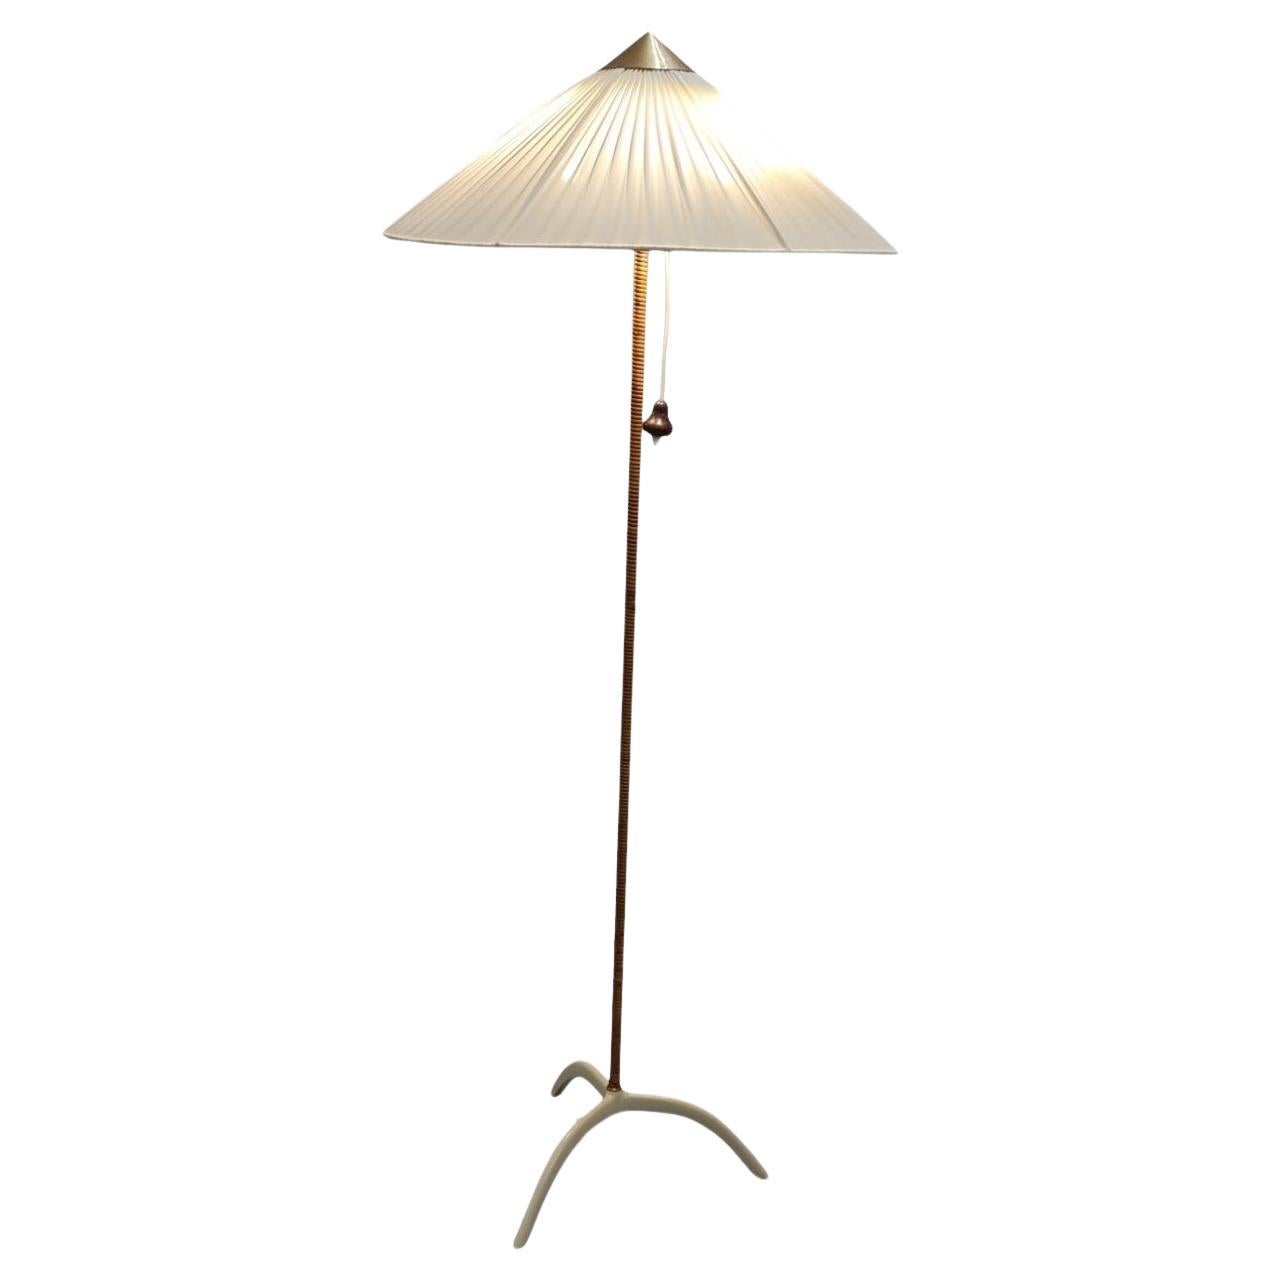 Lampadaire Paavo Tynell modèle. 9615, Taito Oy années 1950